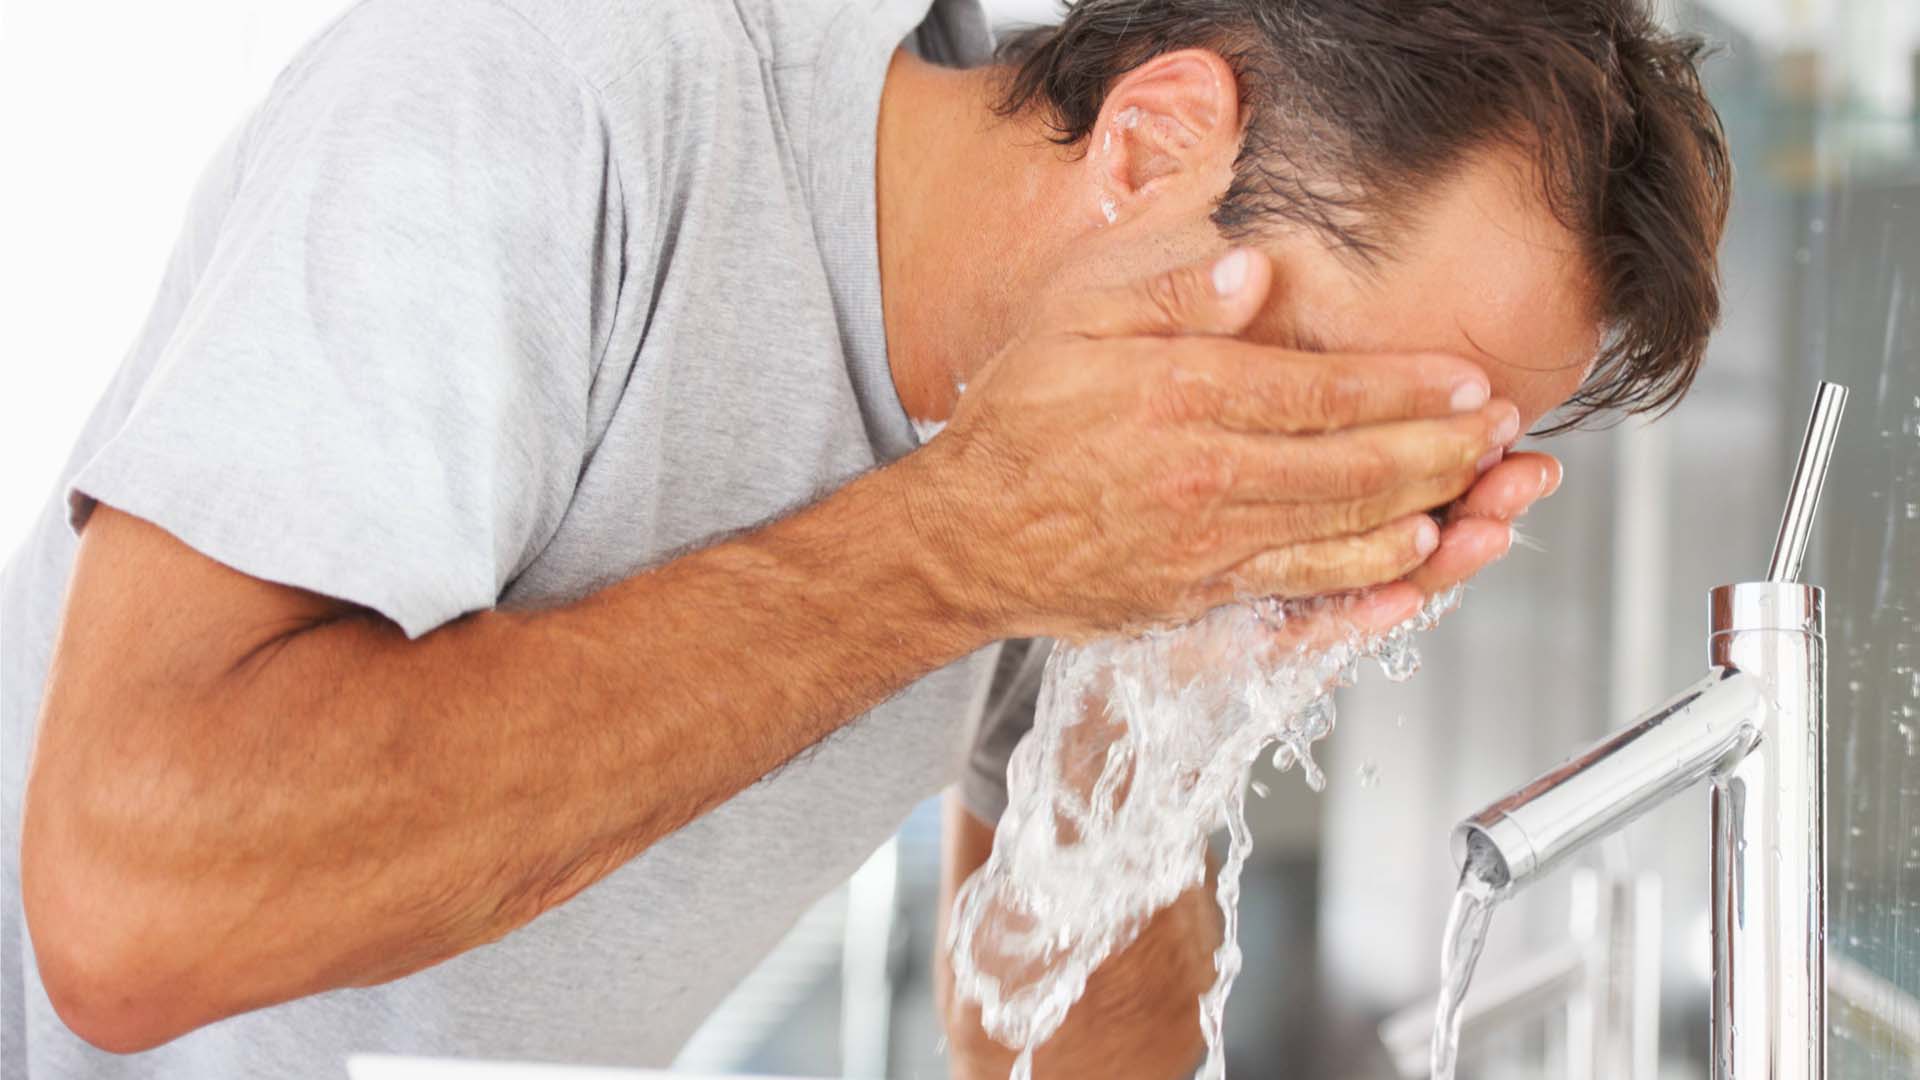 A man splashing his face with cold water over a basin